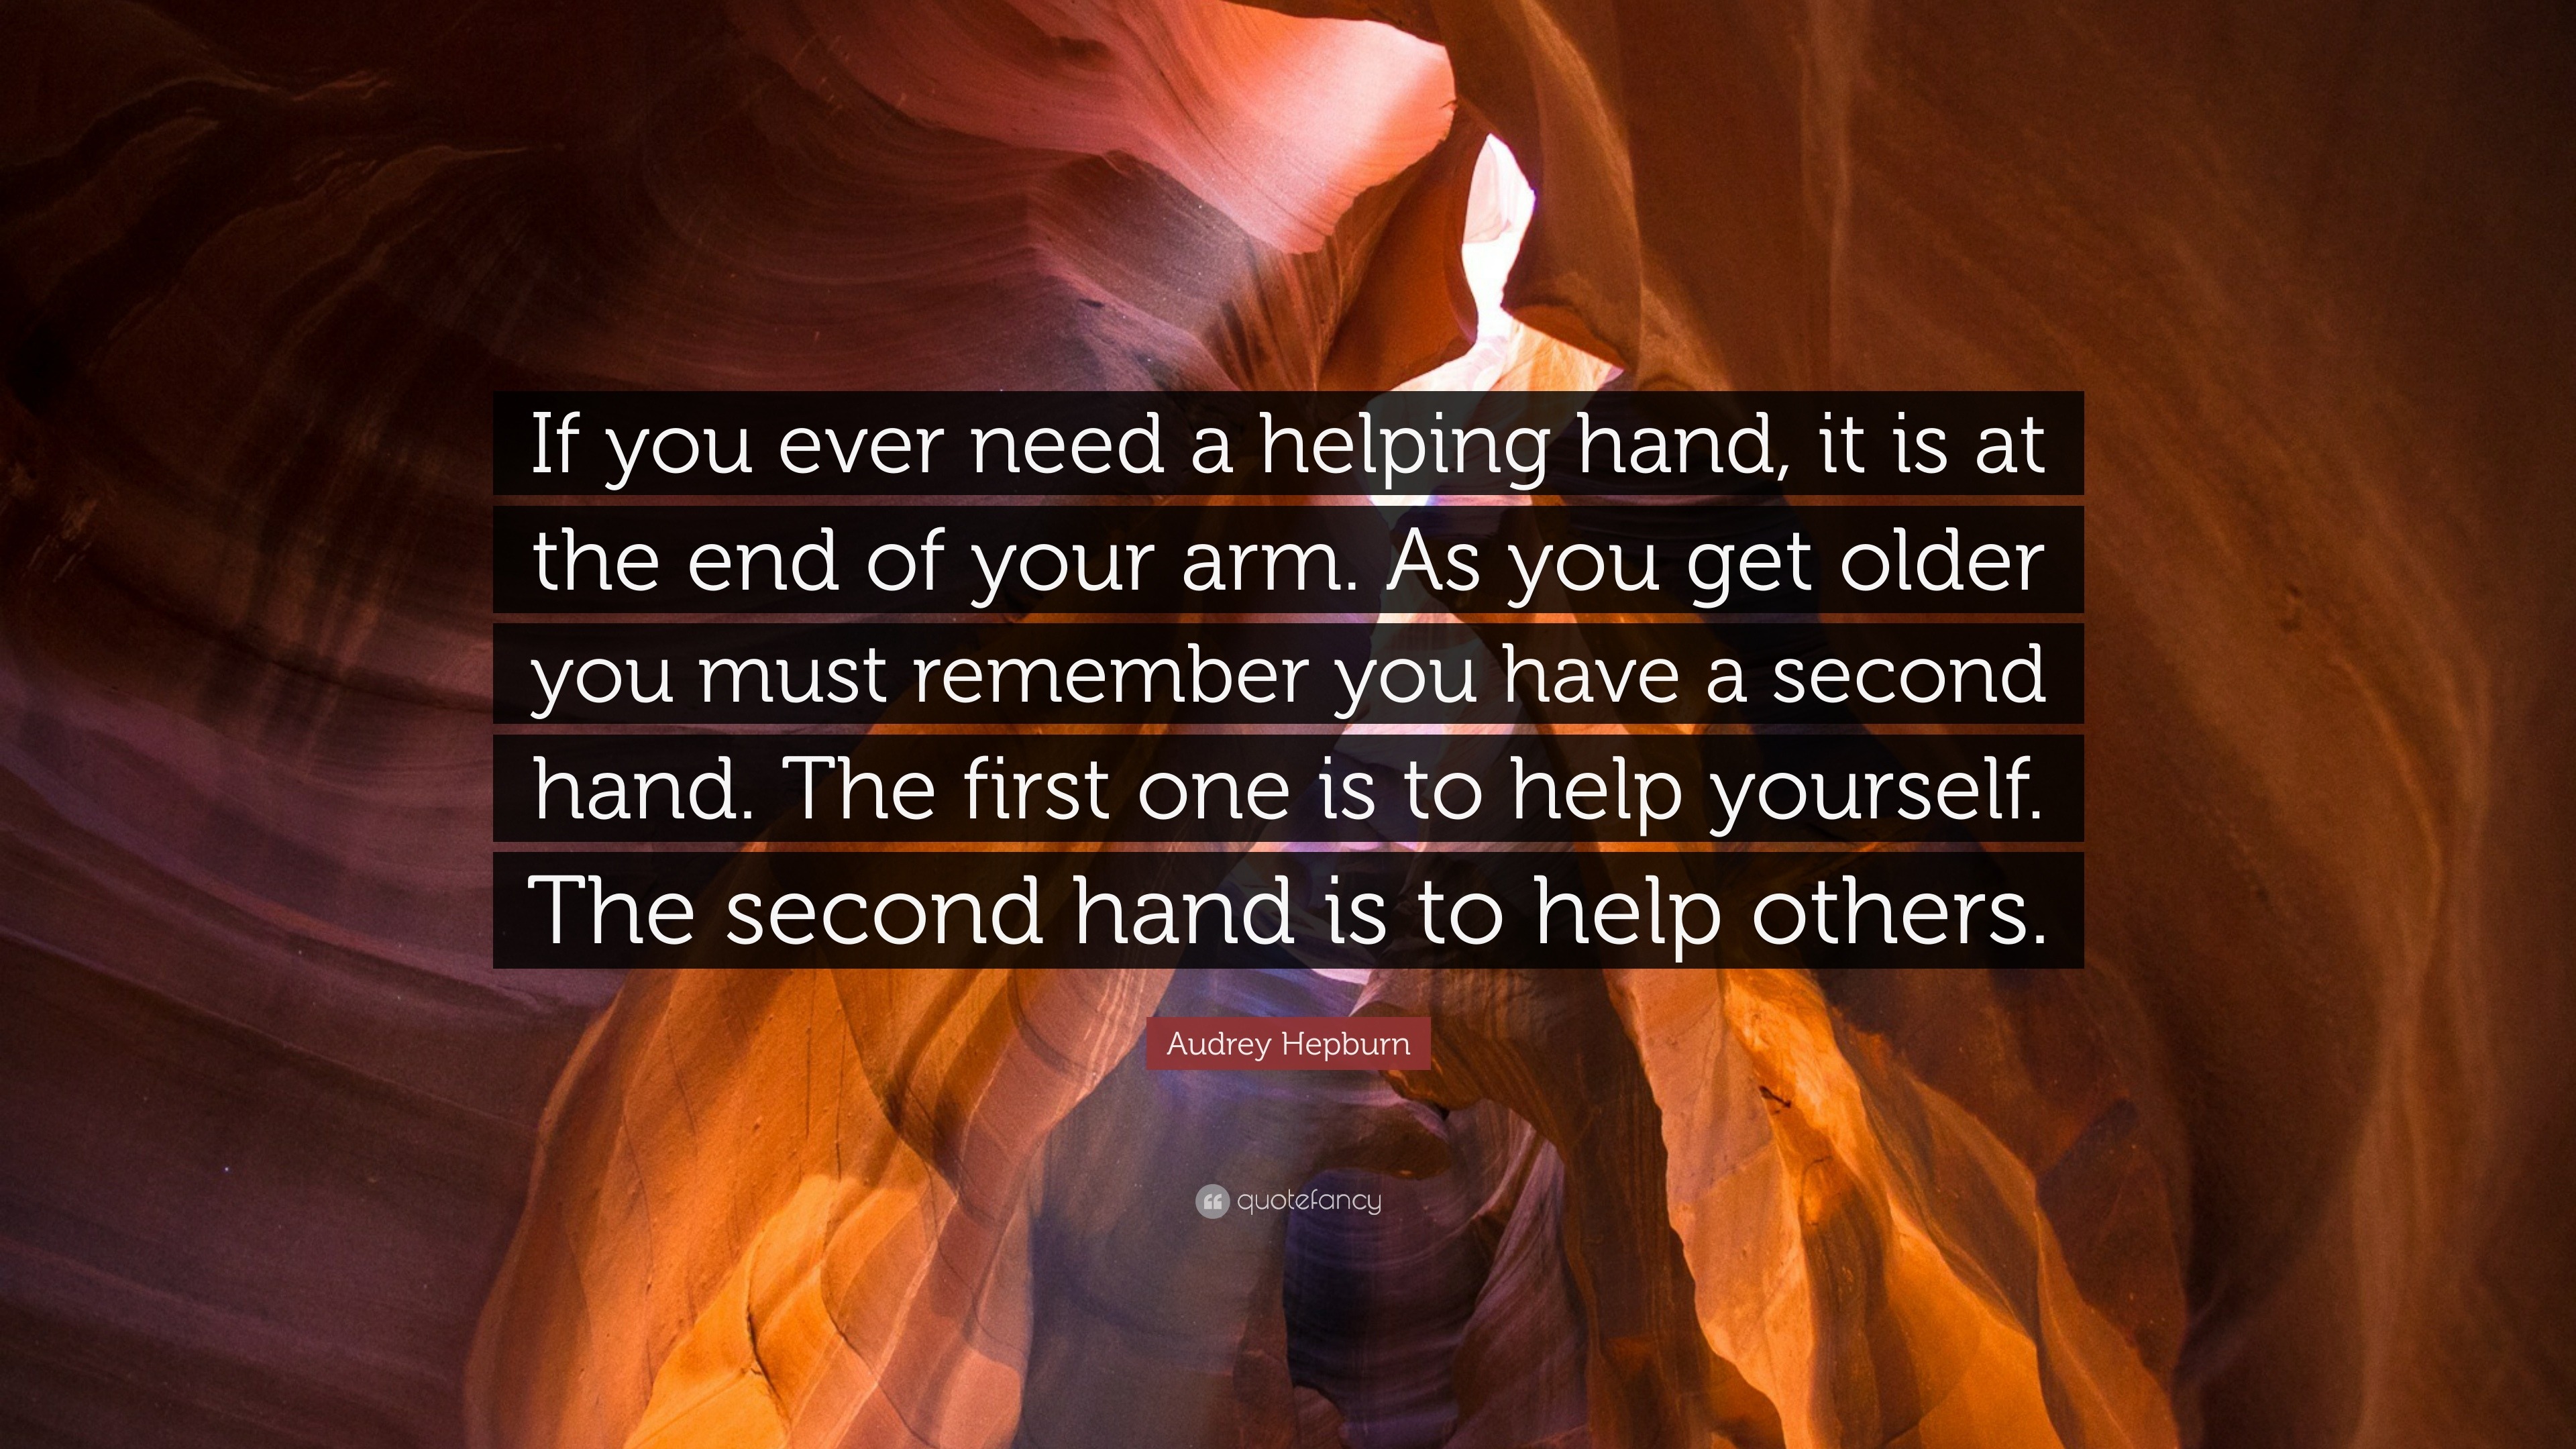 Audrey Hepburn Quote: “If you ever need a helping hand, it is at the ...